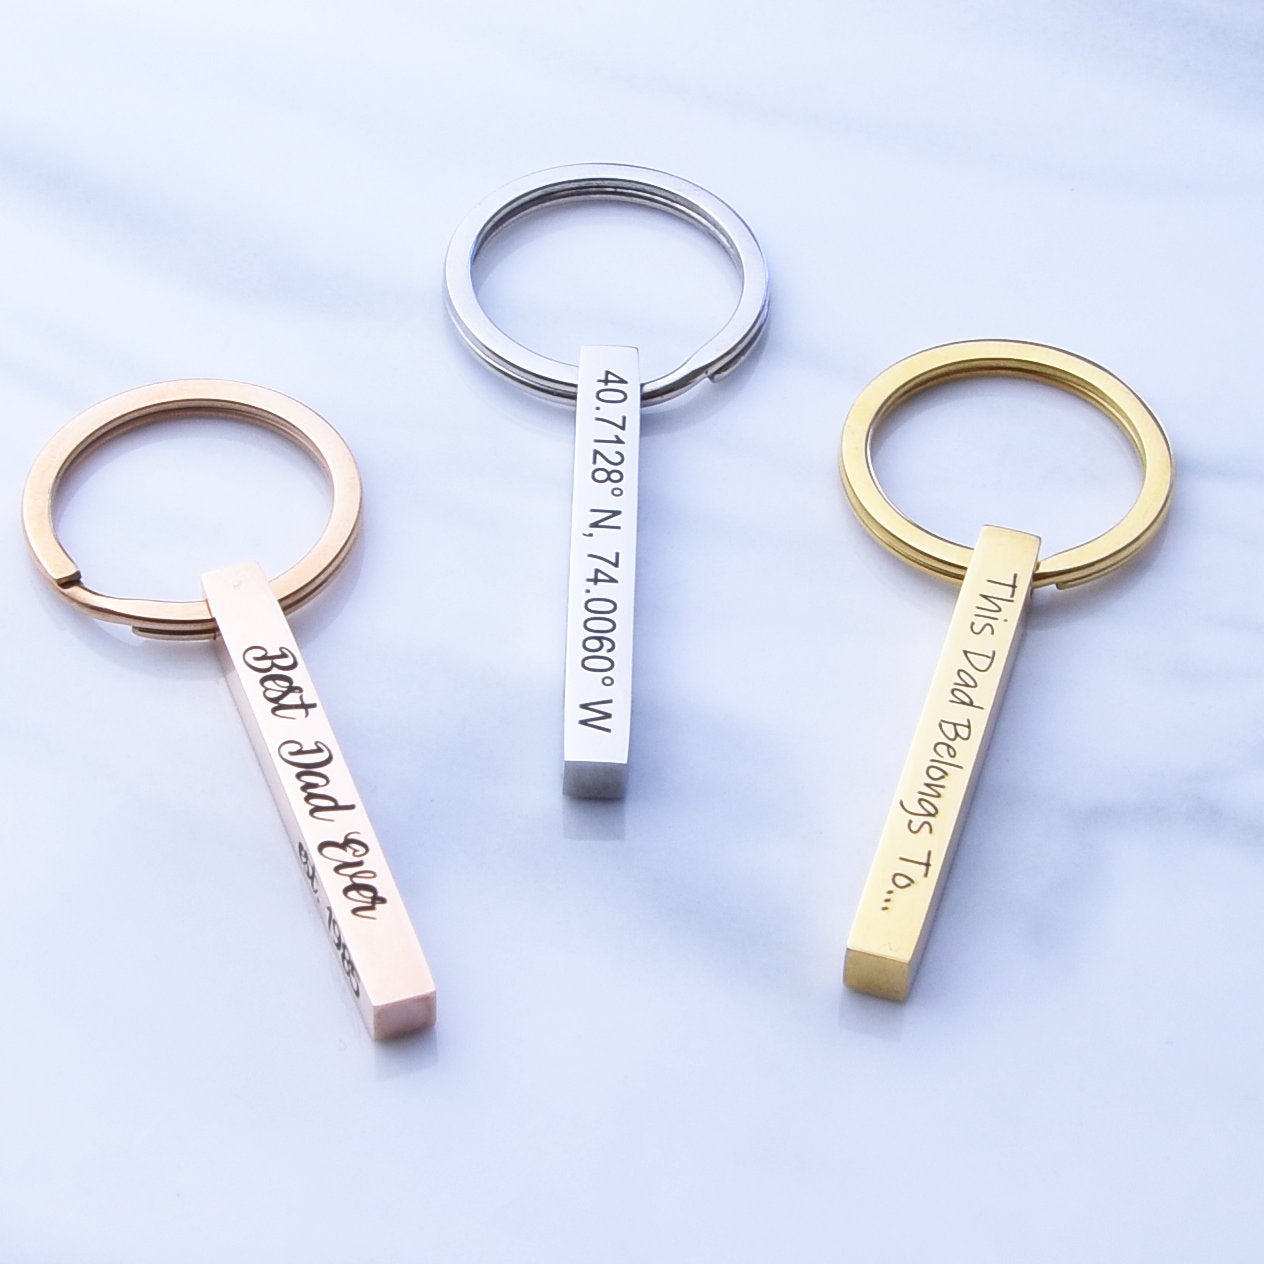 Personalized dad key chain, gifts for dad, engraved stick key